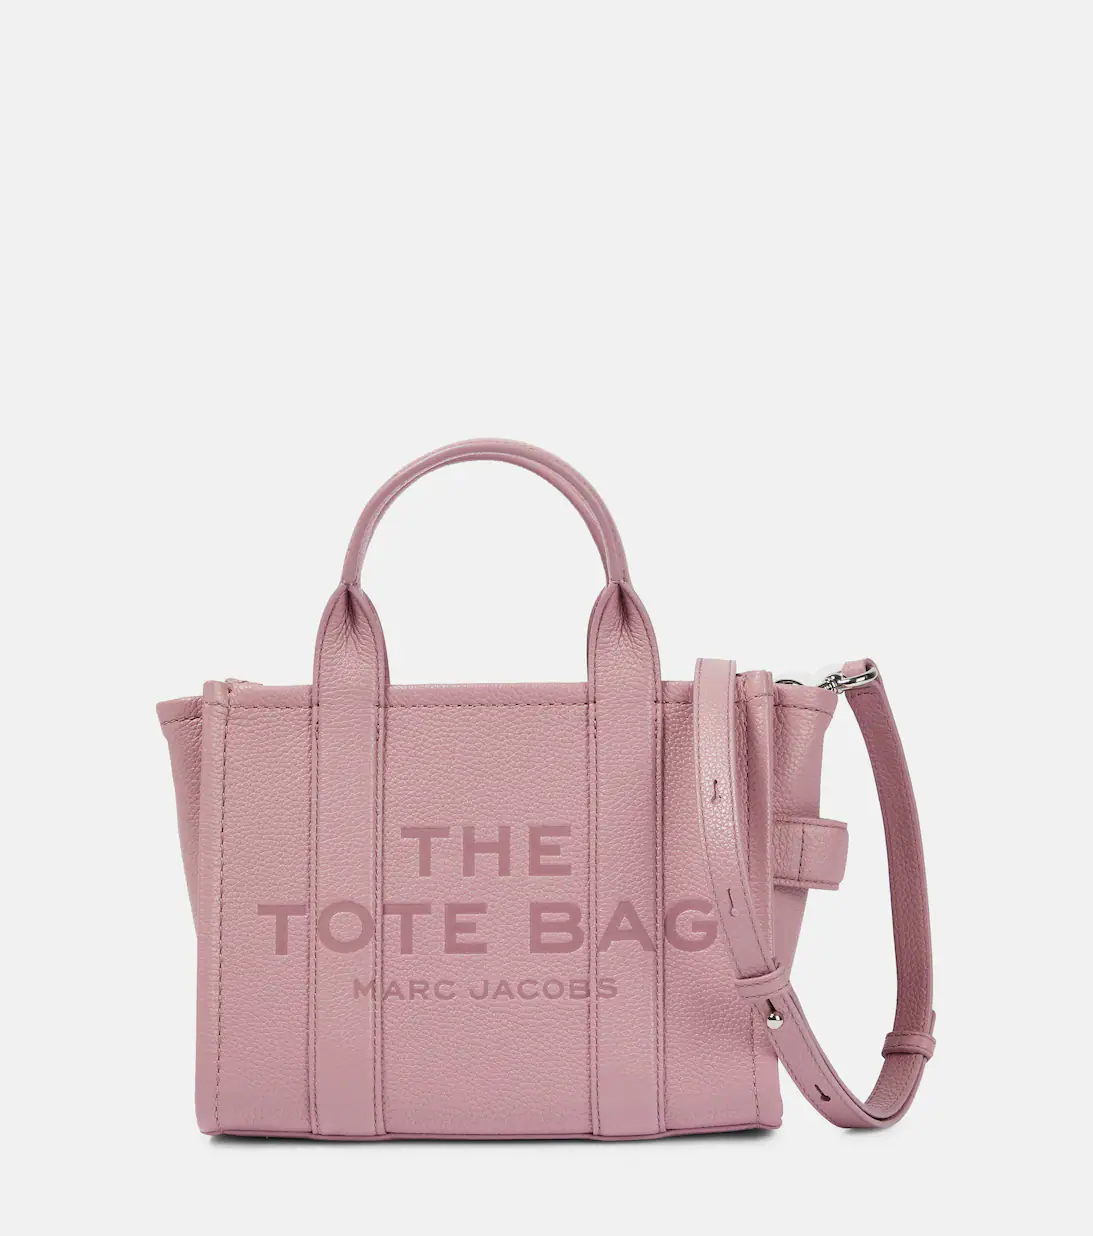 Marc Jacobs Tote Bag Pink: The Perfect Blend of Style and Functionality